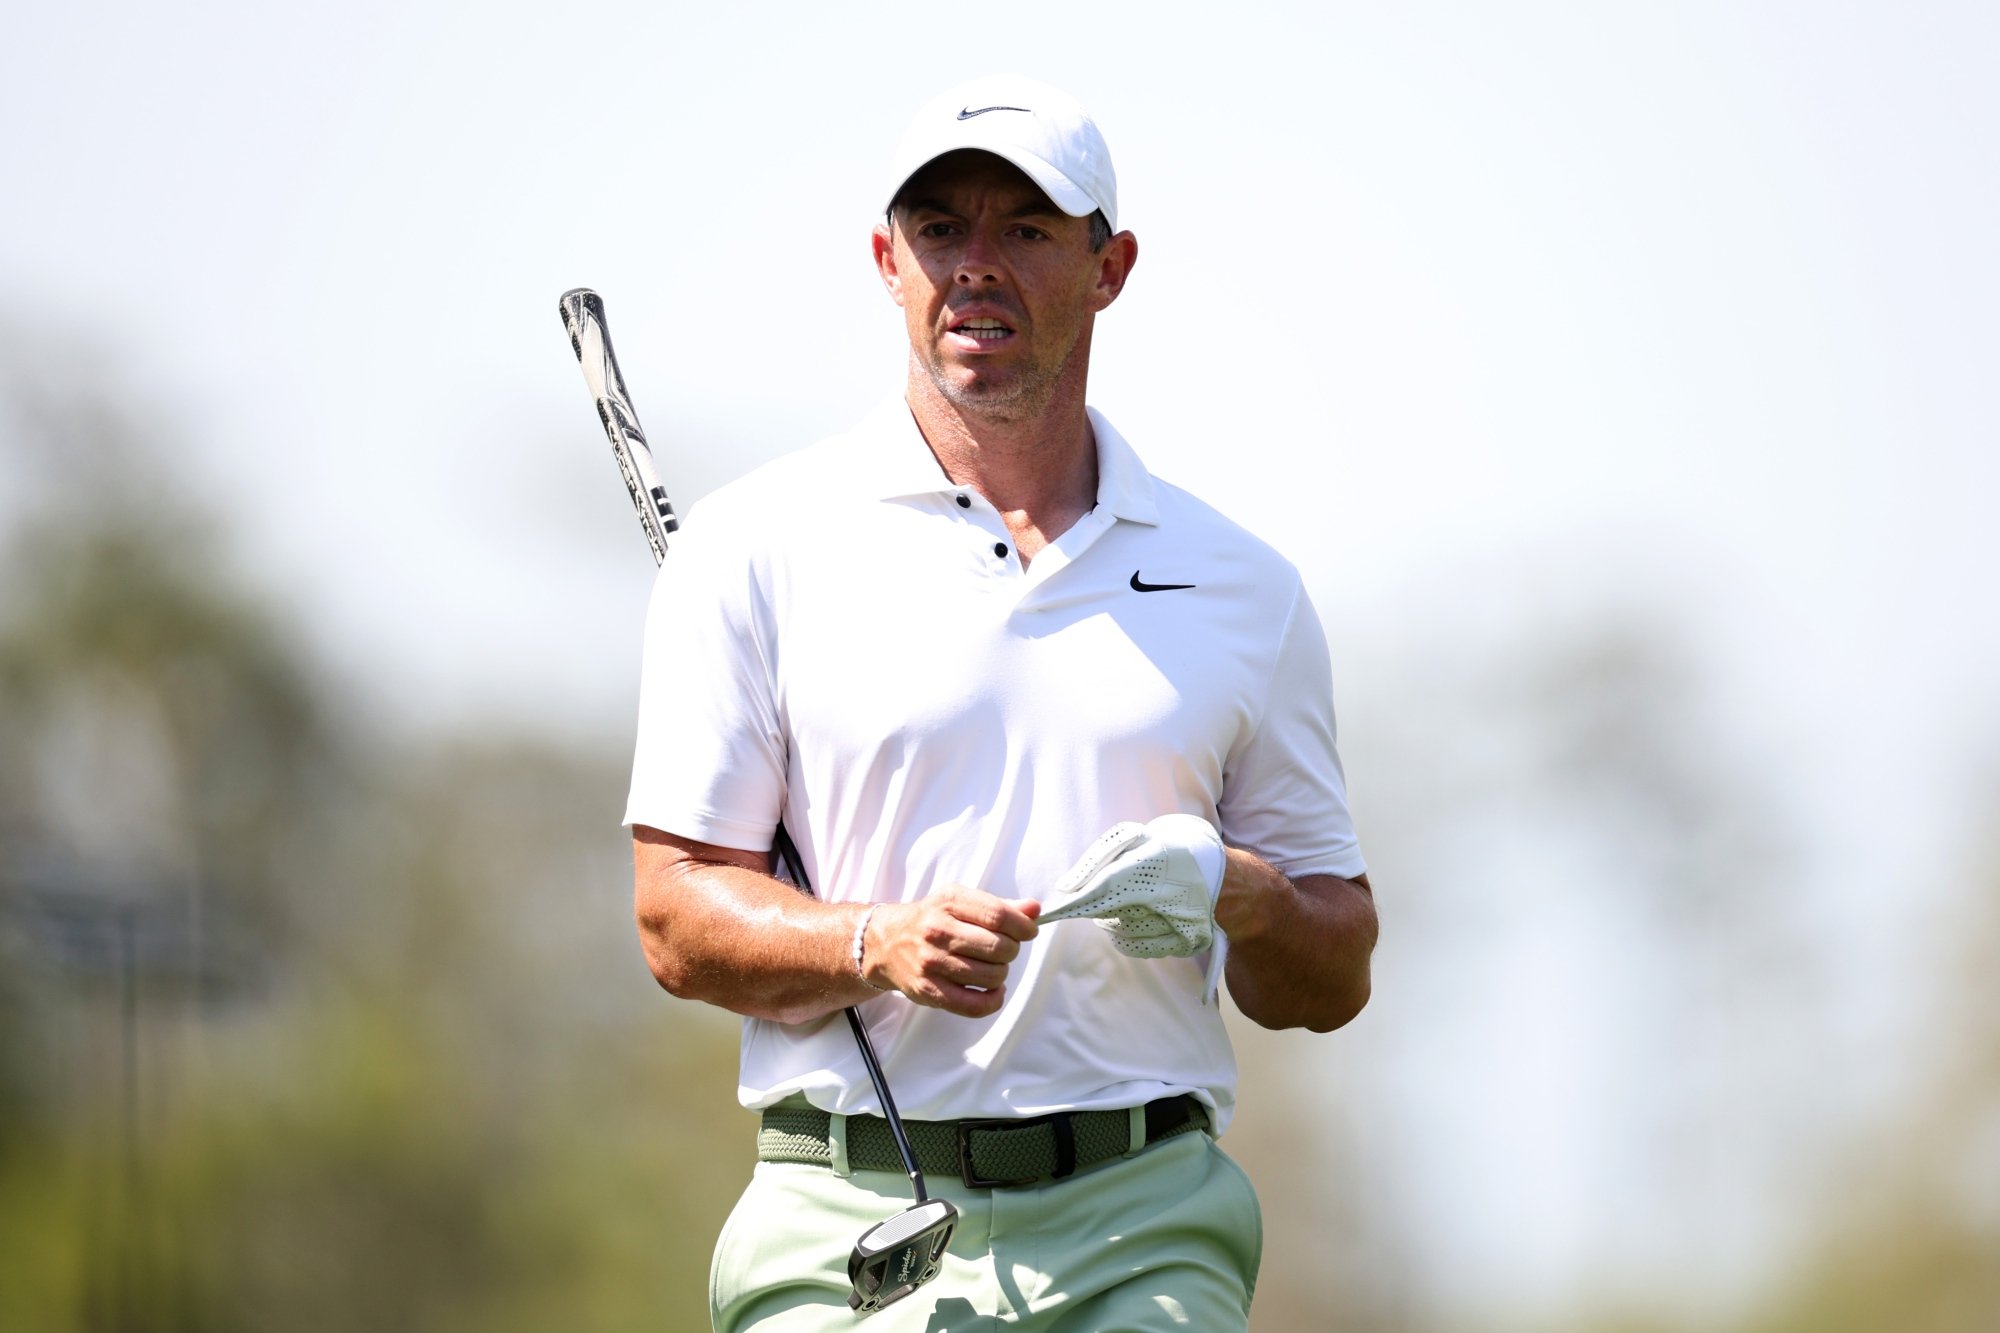 Rory McIlroy fights Jay Monahan's corner: 'We all need to move on'